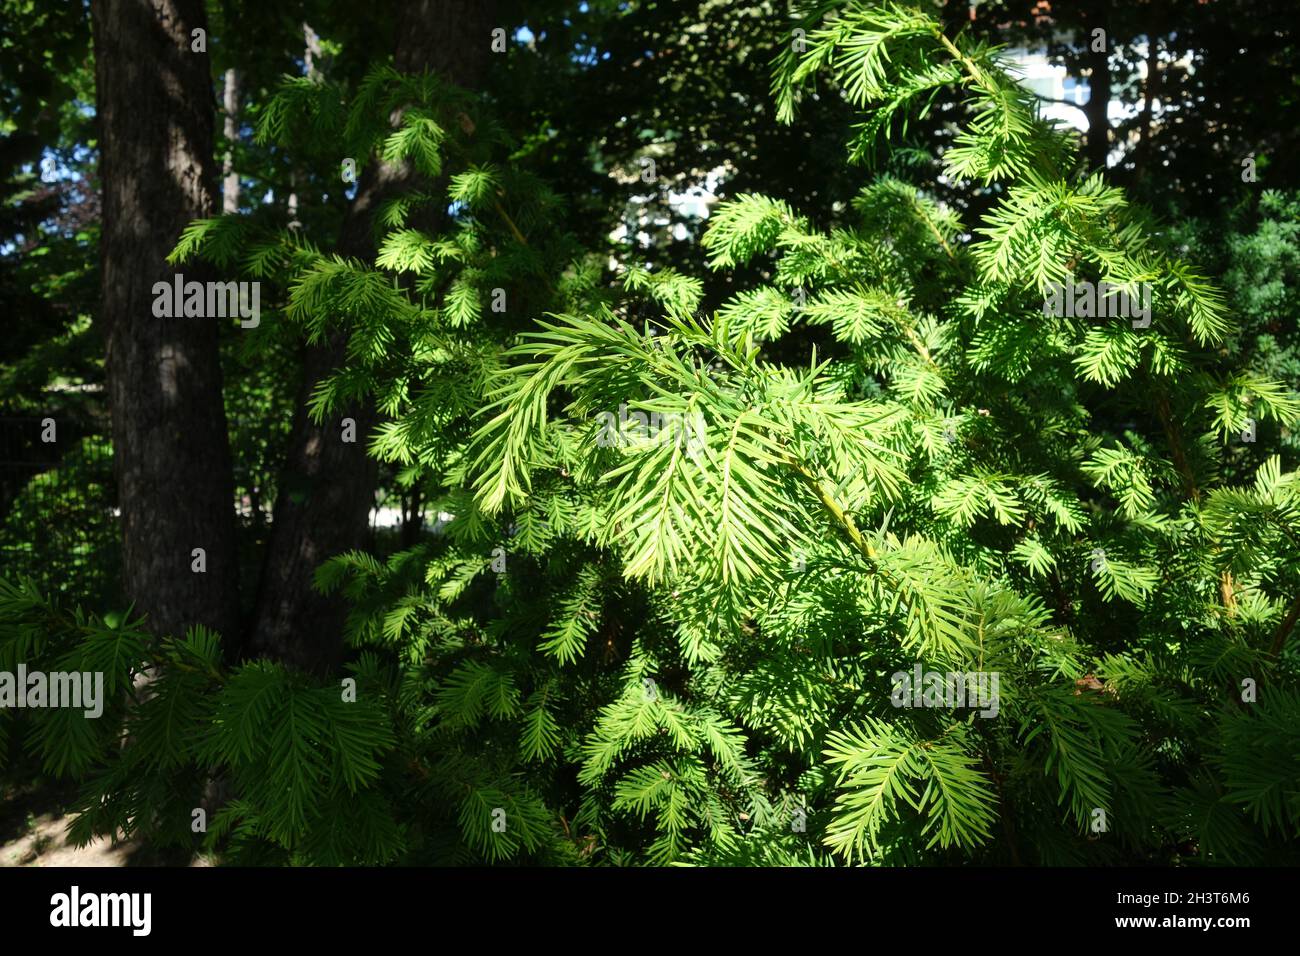 Taxus baccata, Yew, young leaves Stock Photo